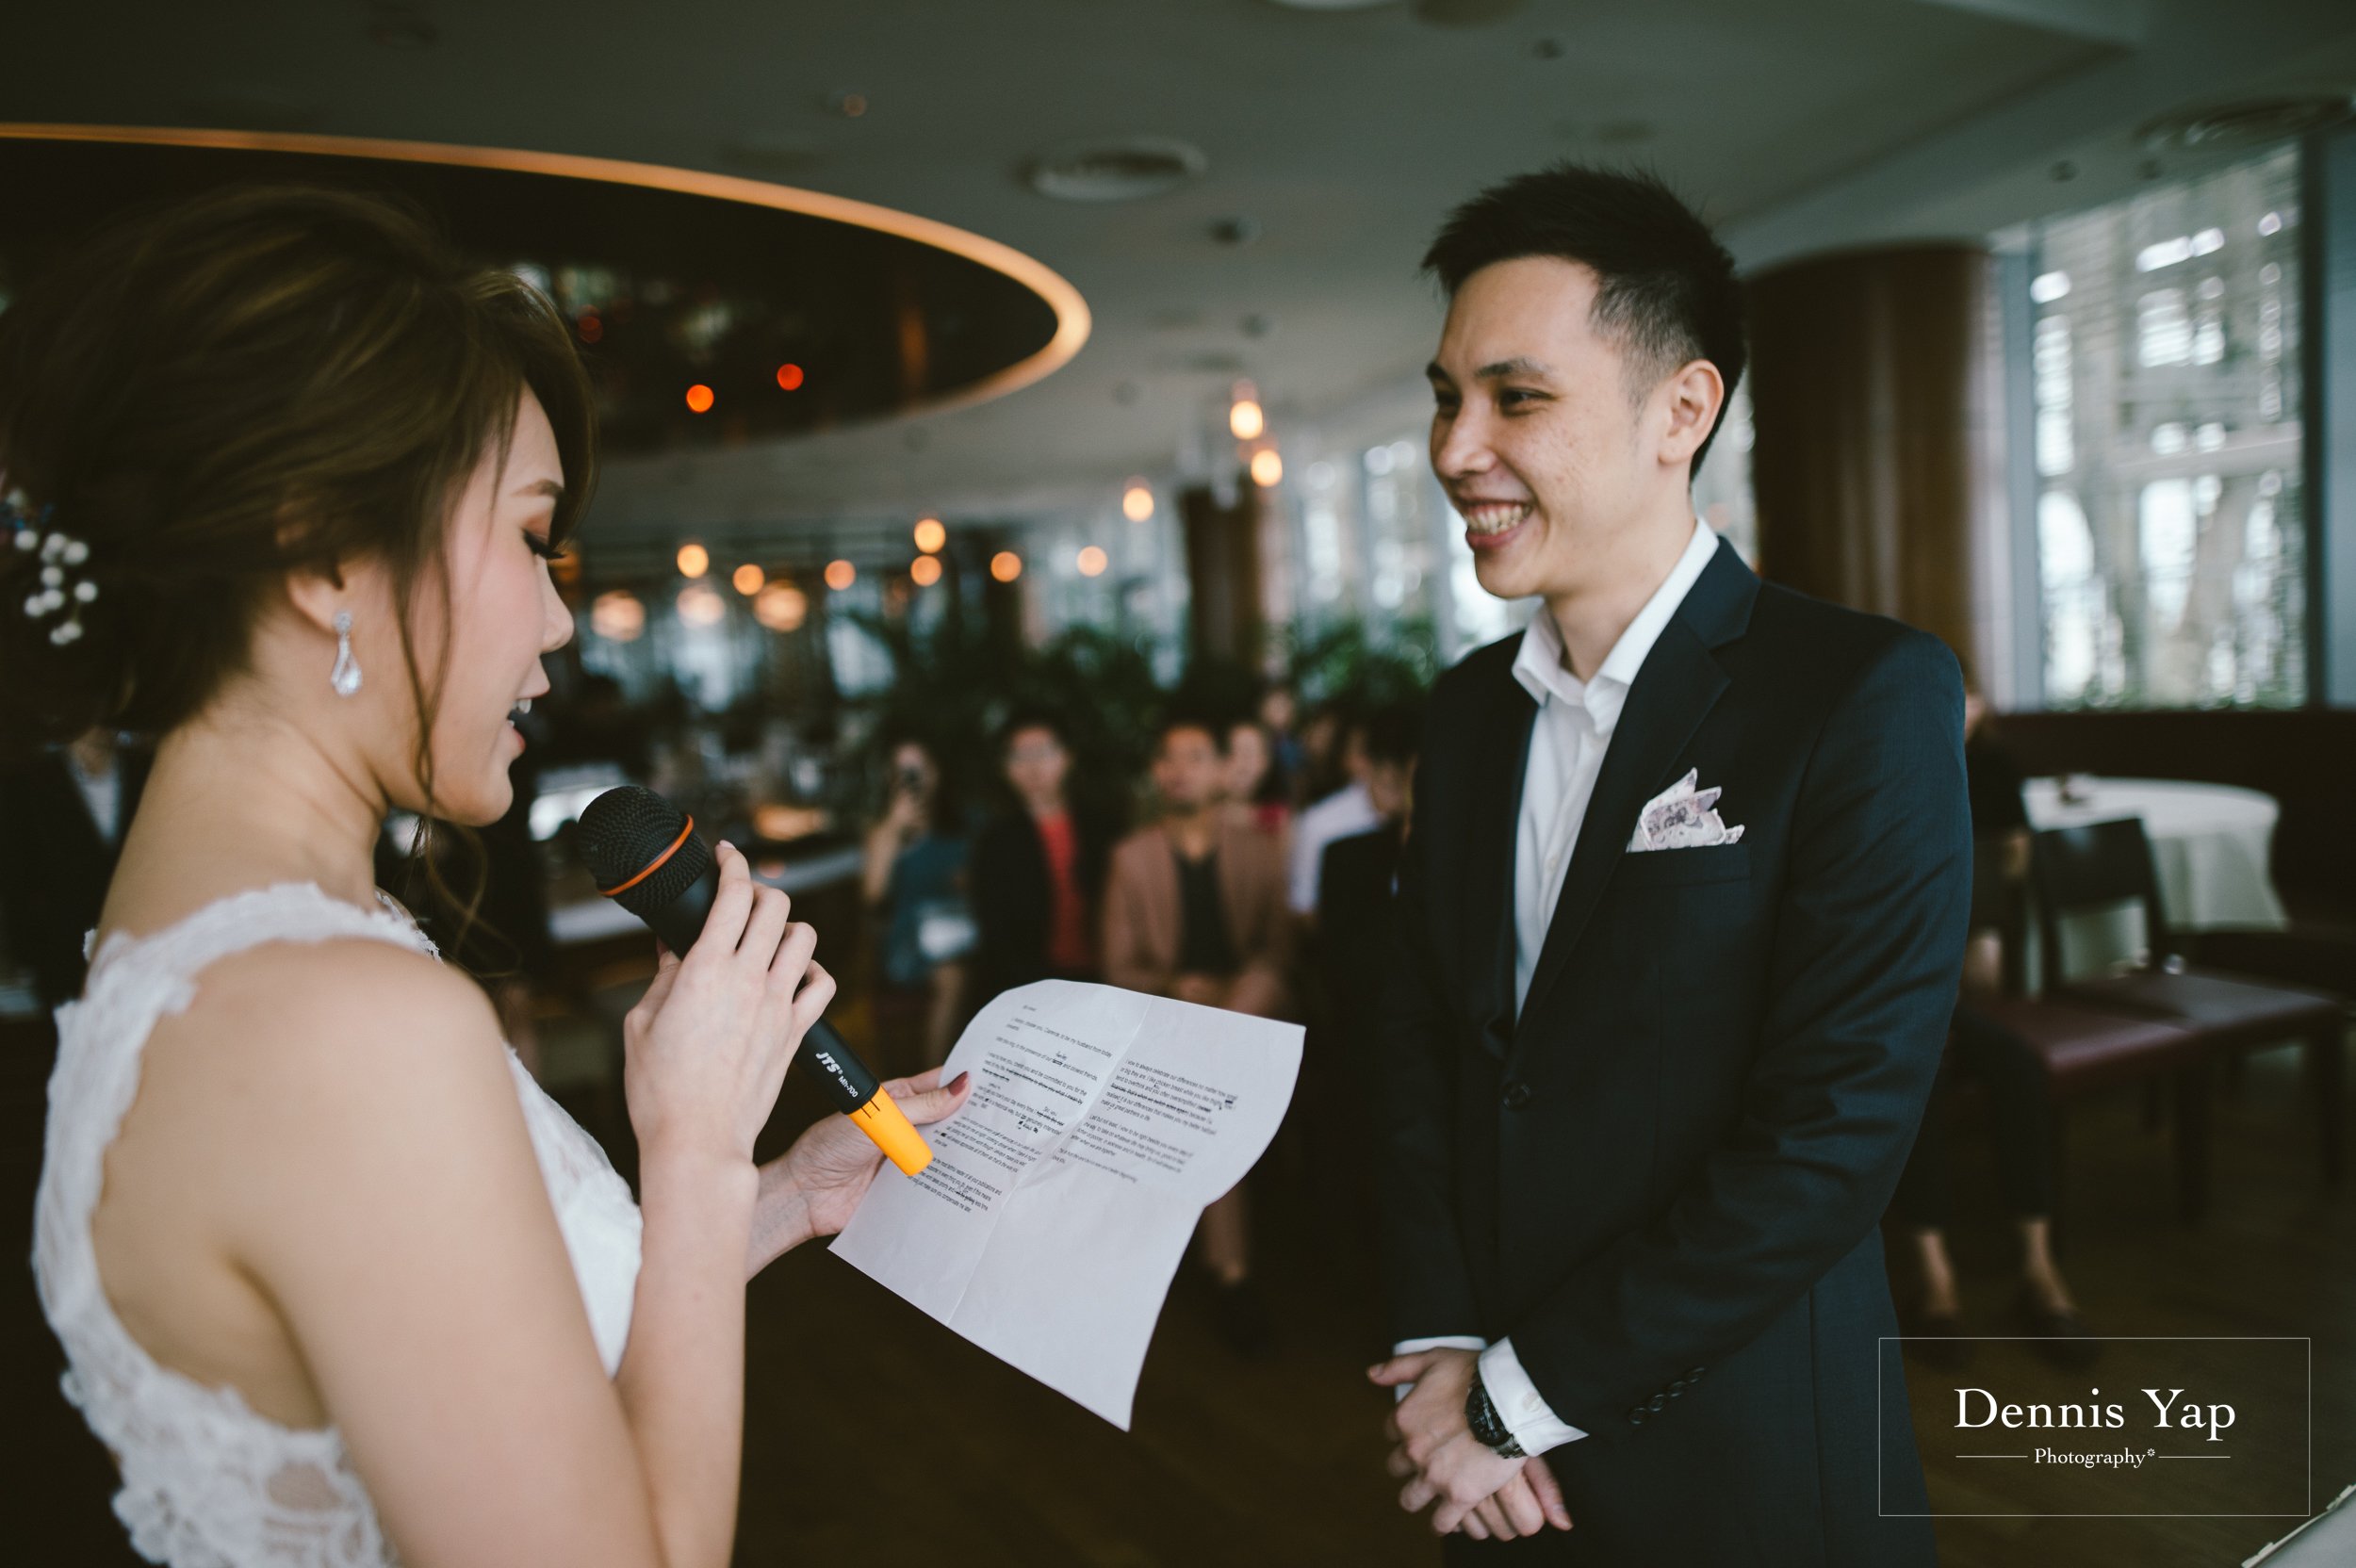 clarence kerlyn registration of marriage in zafferano singapore dennis yap photography malaysia top wedding photographer-12.jpg